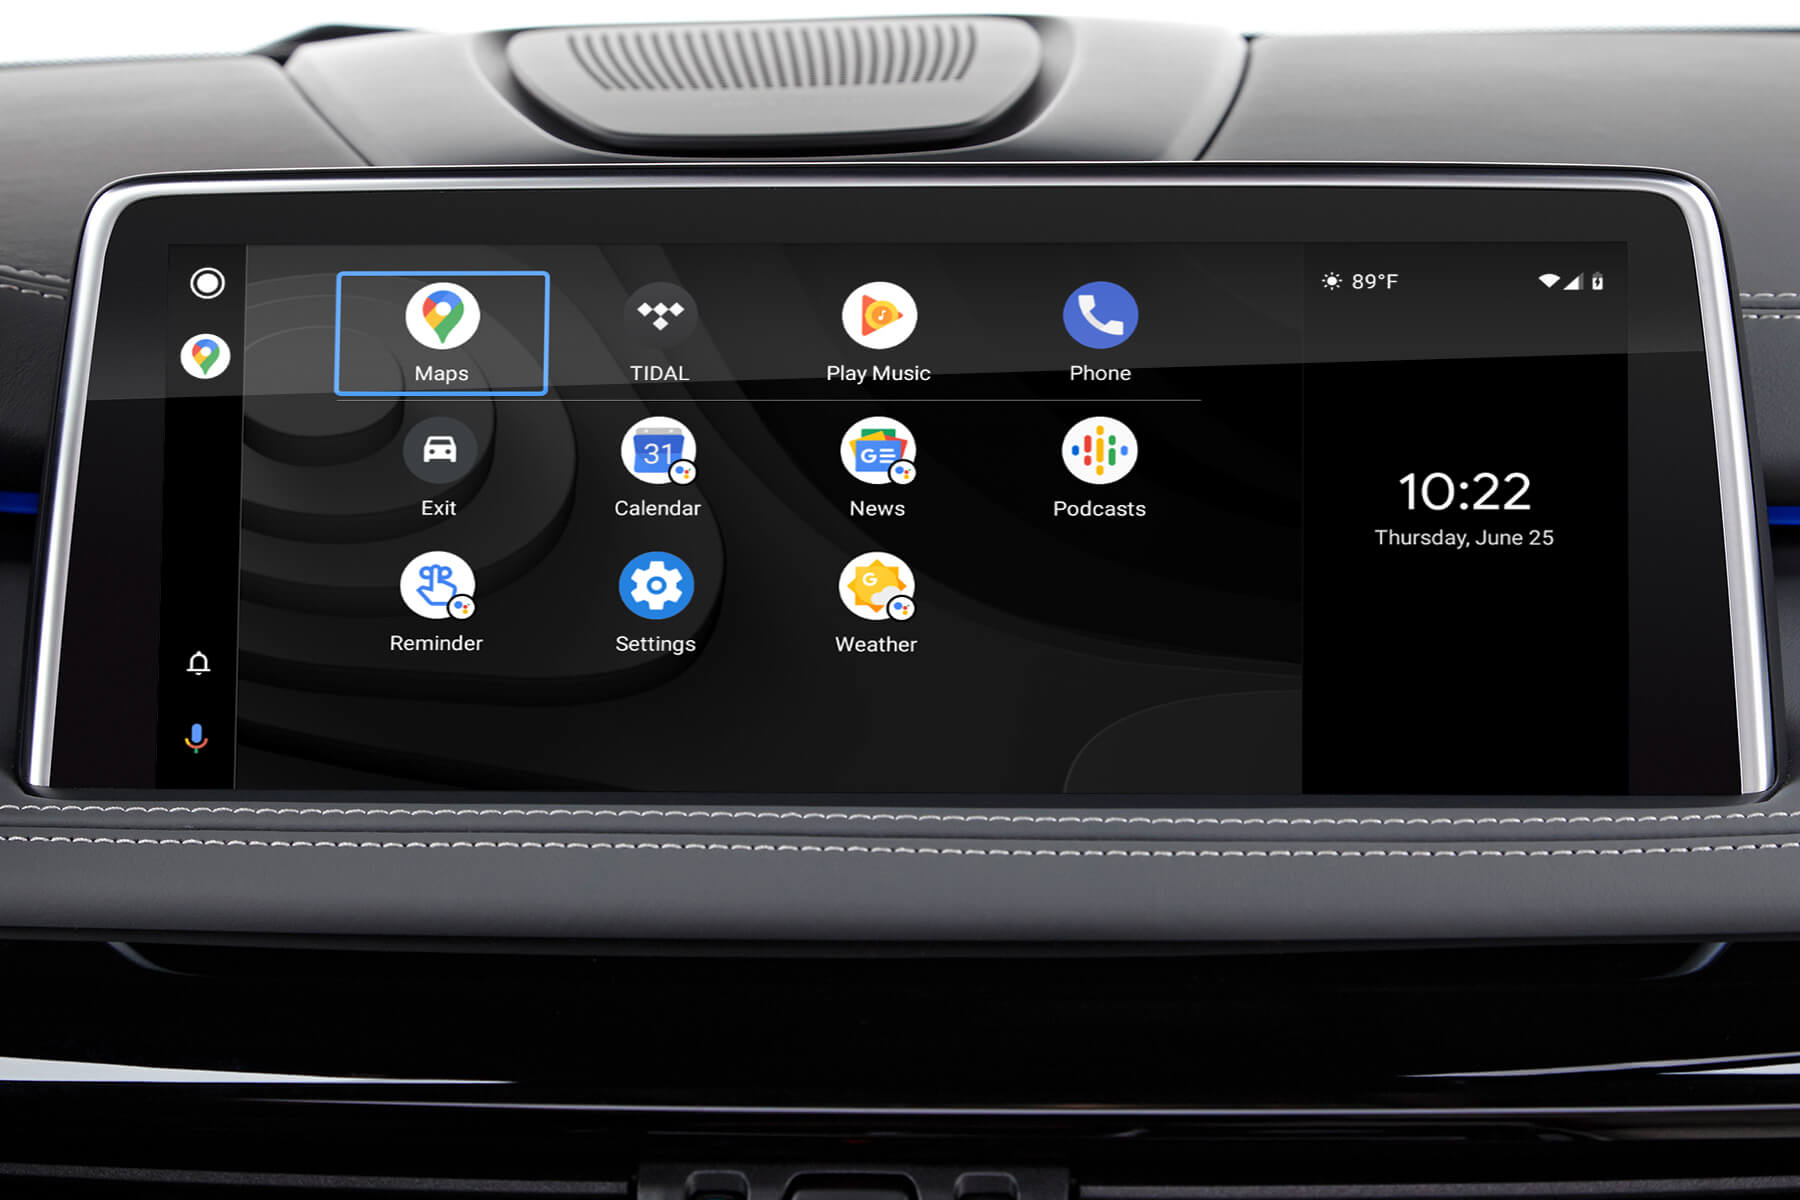 You can now use Android Auto without a USB cable